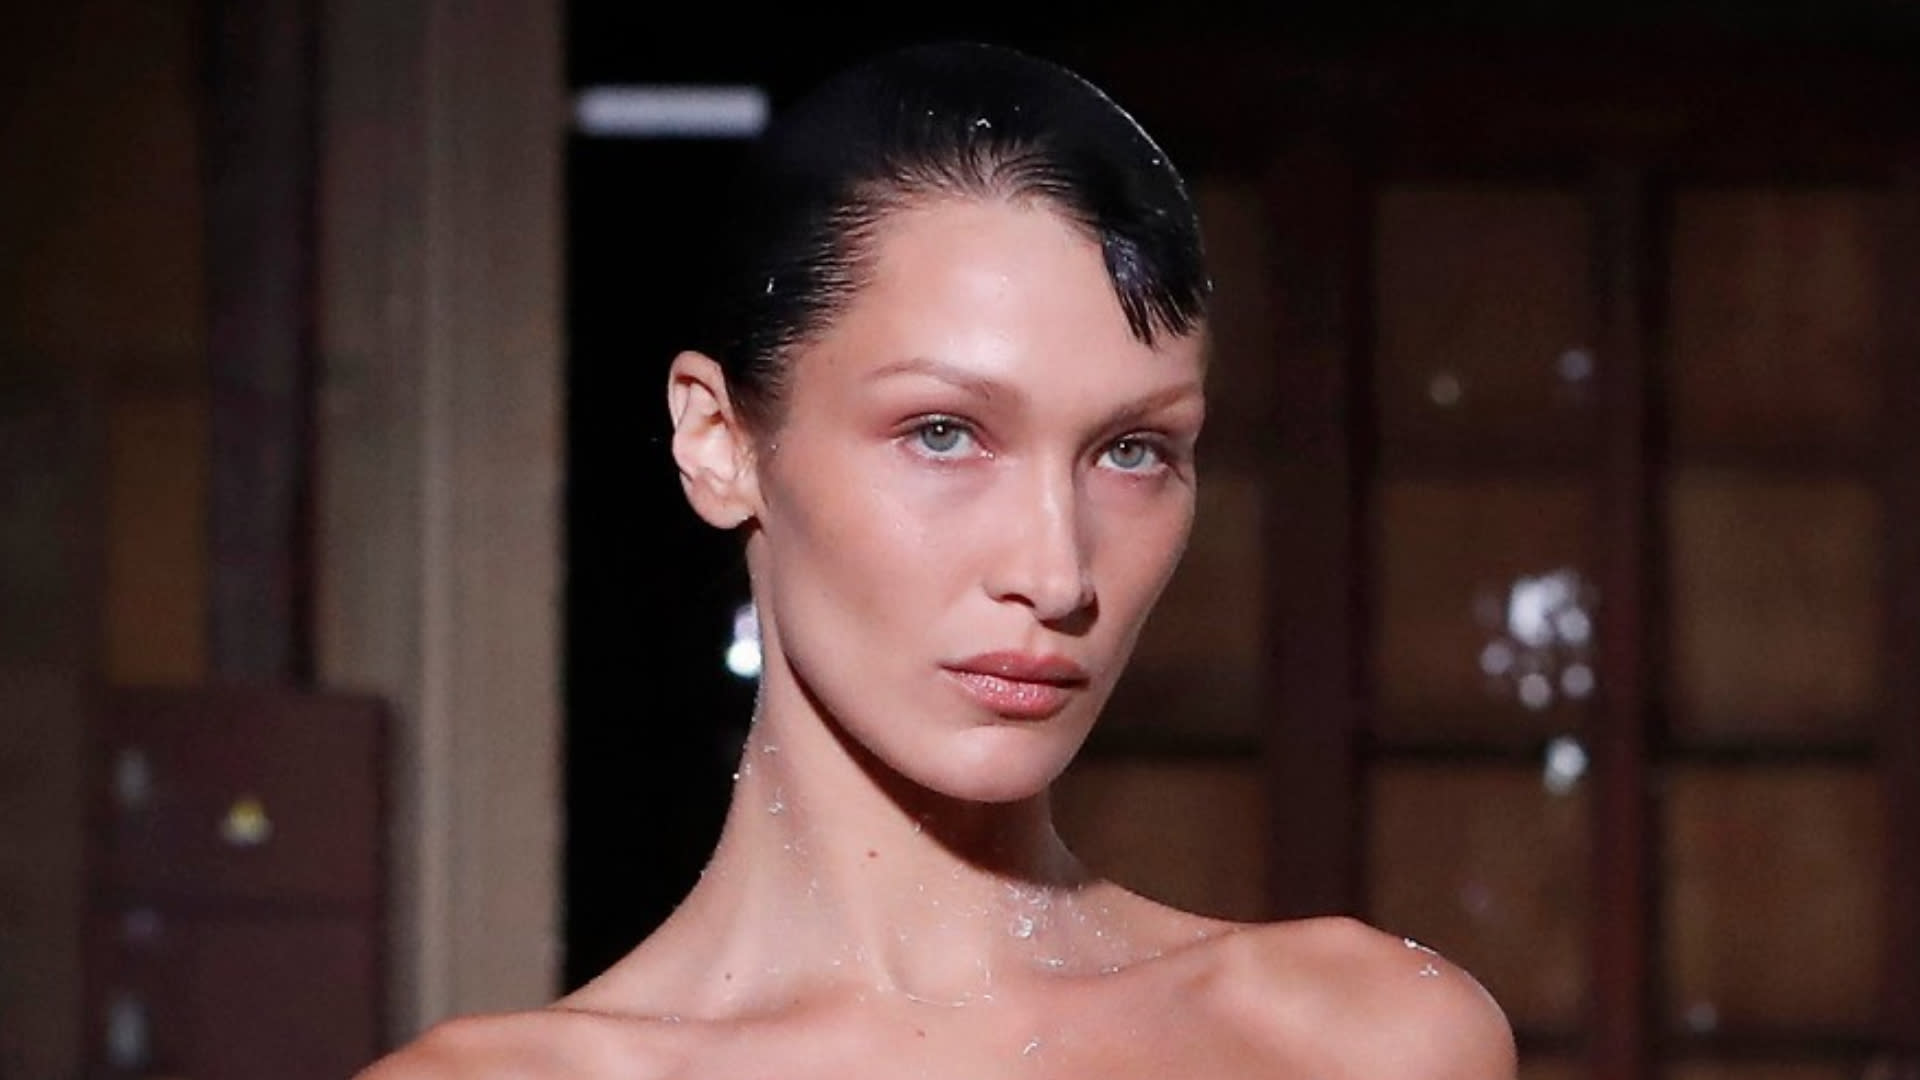 Bella Hadid Proves That Sometimes, Two Belts Are Better Than One